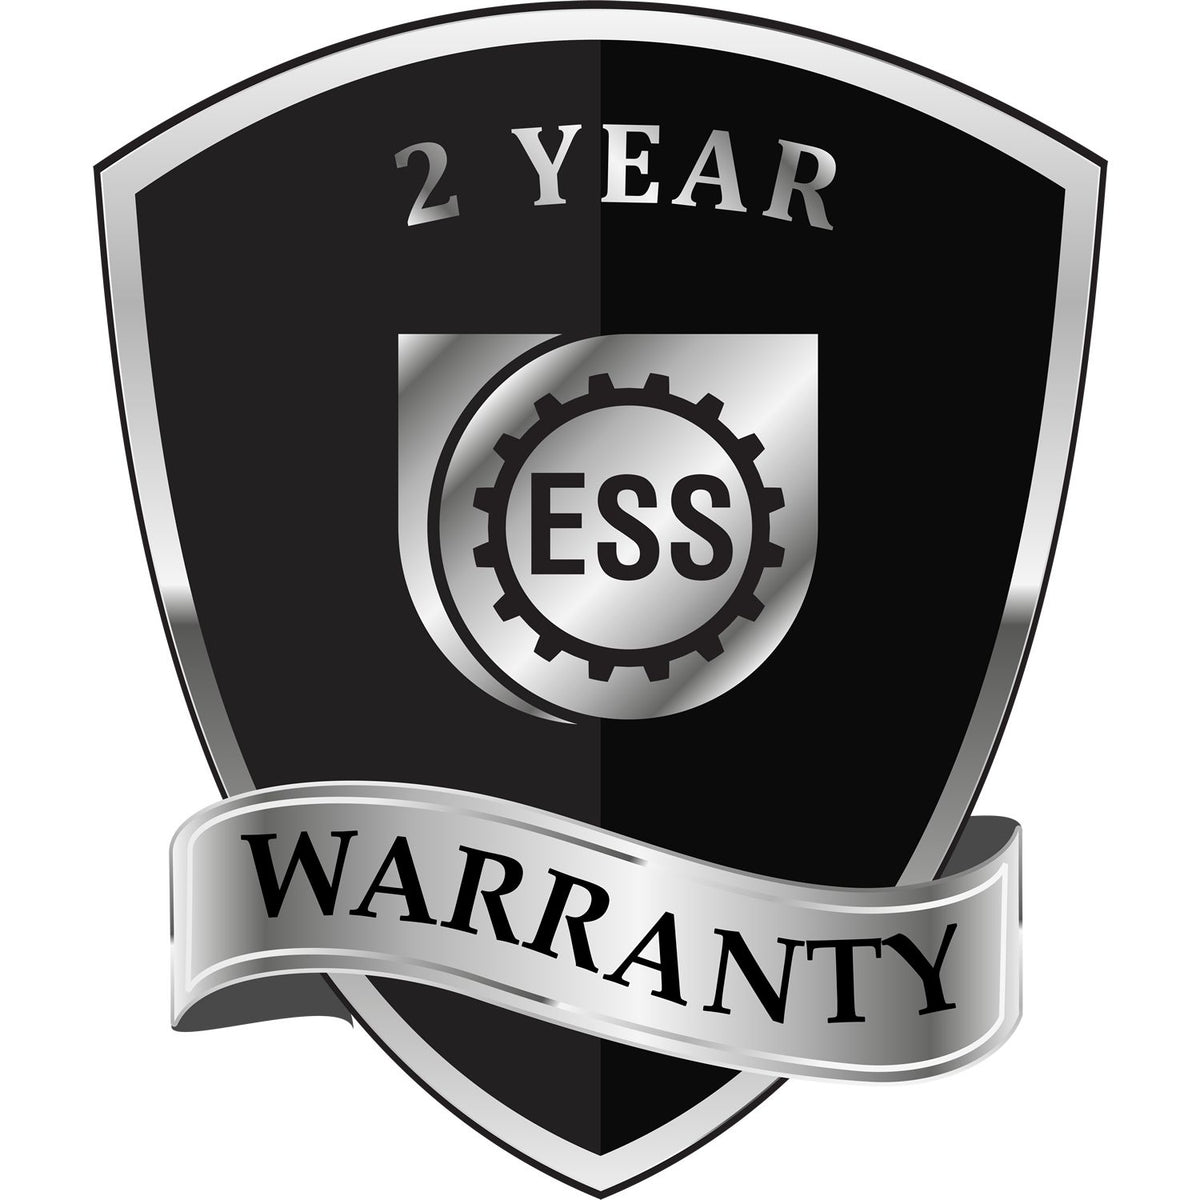 A black and silver badge or emblem showing warranty information for the State of Massachusetts Extended Long Reach Geologist Seal